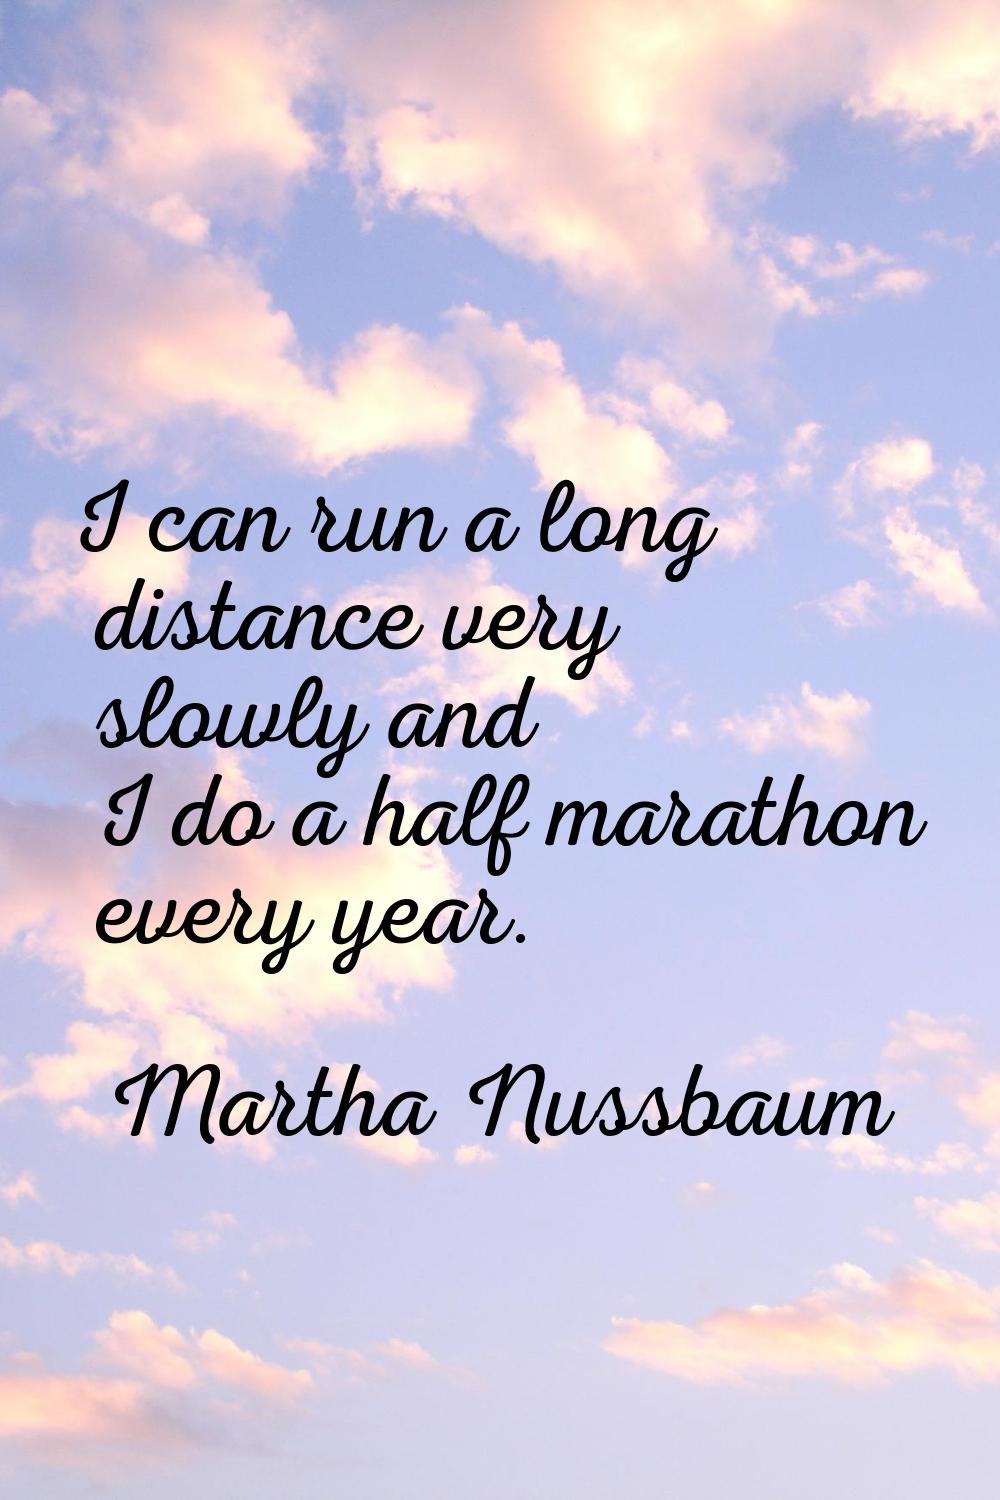 I can run a long distance very slowly and I do a half marathon every year.